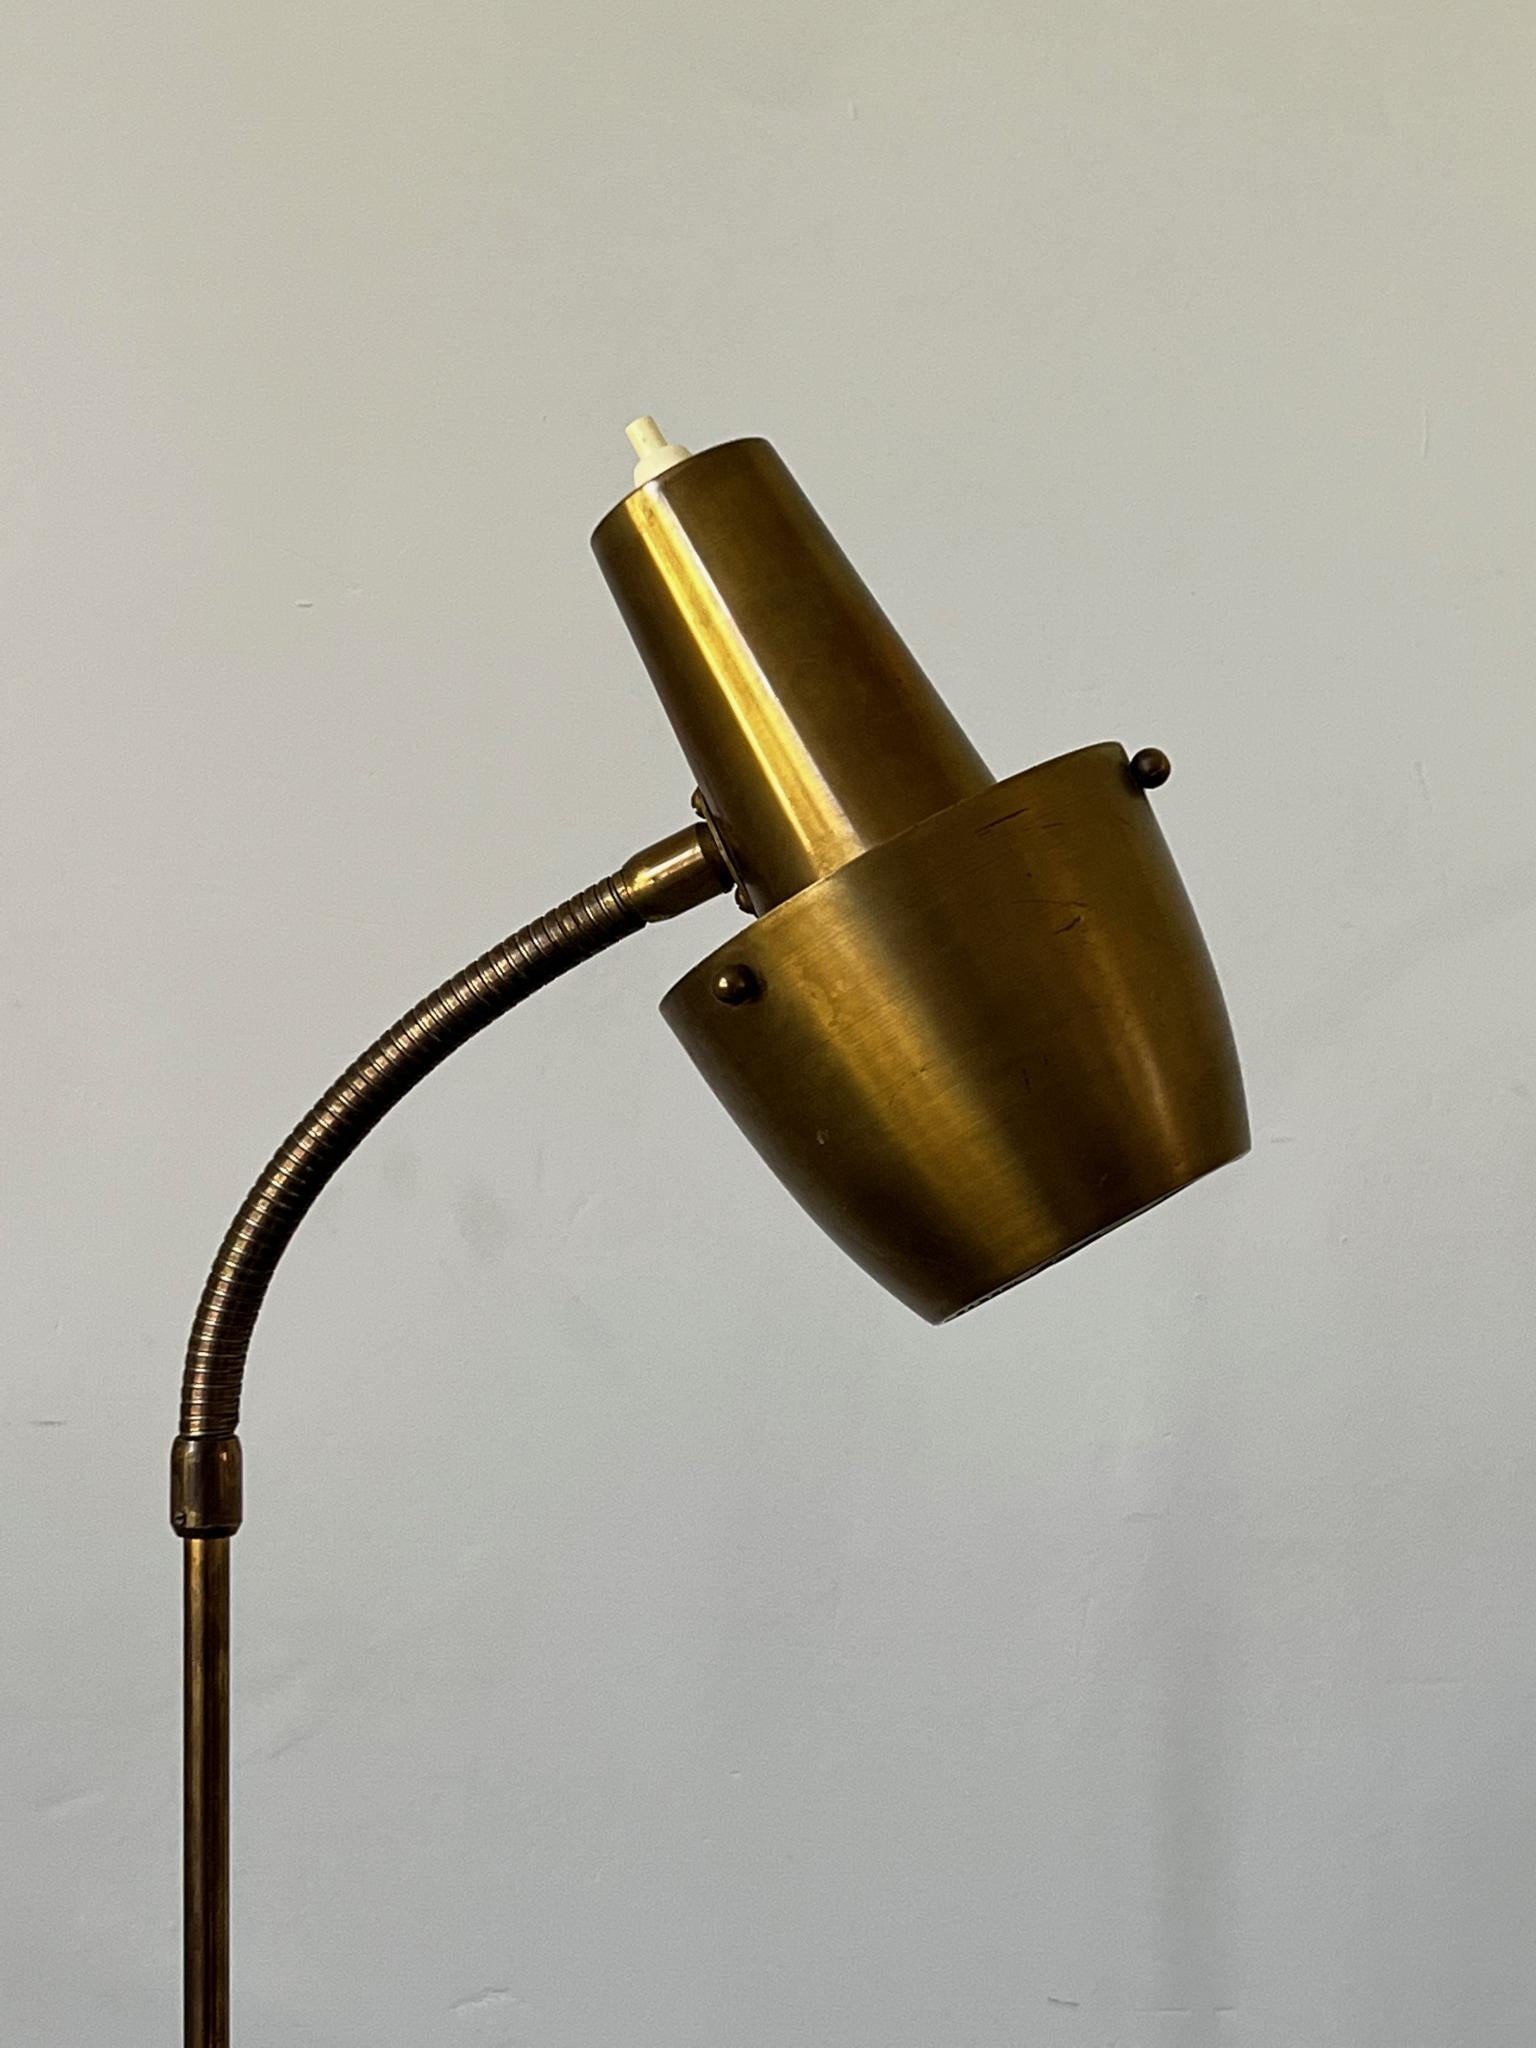 Brass floor lamp with adjustable neck and weighted base. Sweden, mid-20th century. 

A neat compact design in good original condition. There is with wear in line with age and use, including minor losses to the finish, light distortions to the round